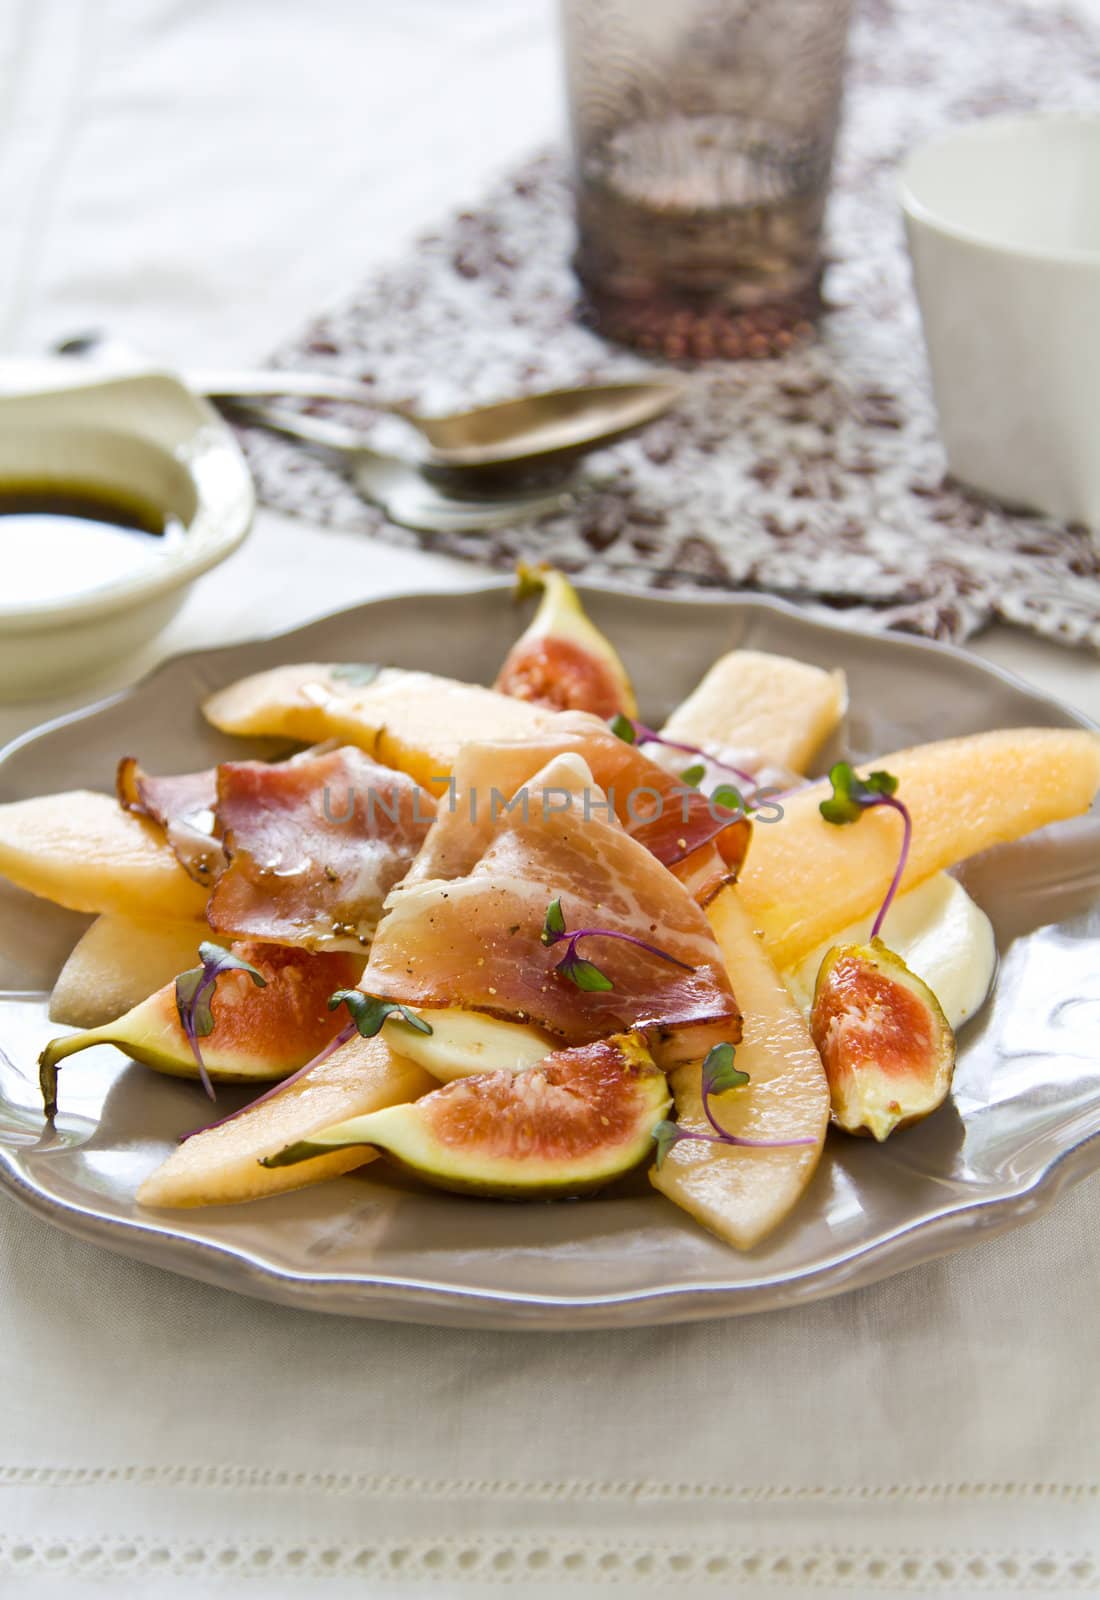 Fig,Cantaloupe with Prosciutto and Mozzarella salad [ Antipasti ] with purple sprout on top by Balsamic dressing